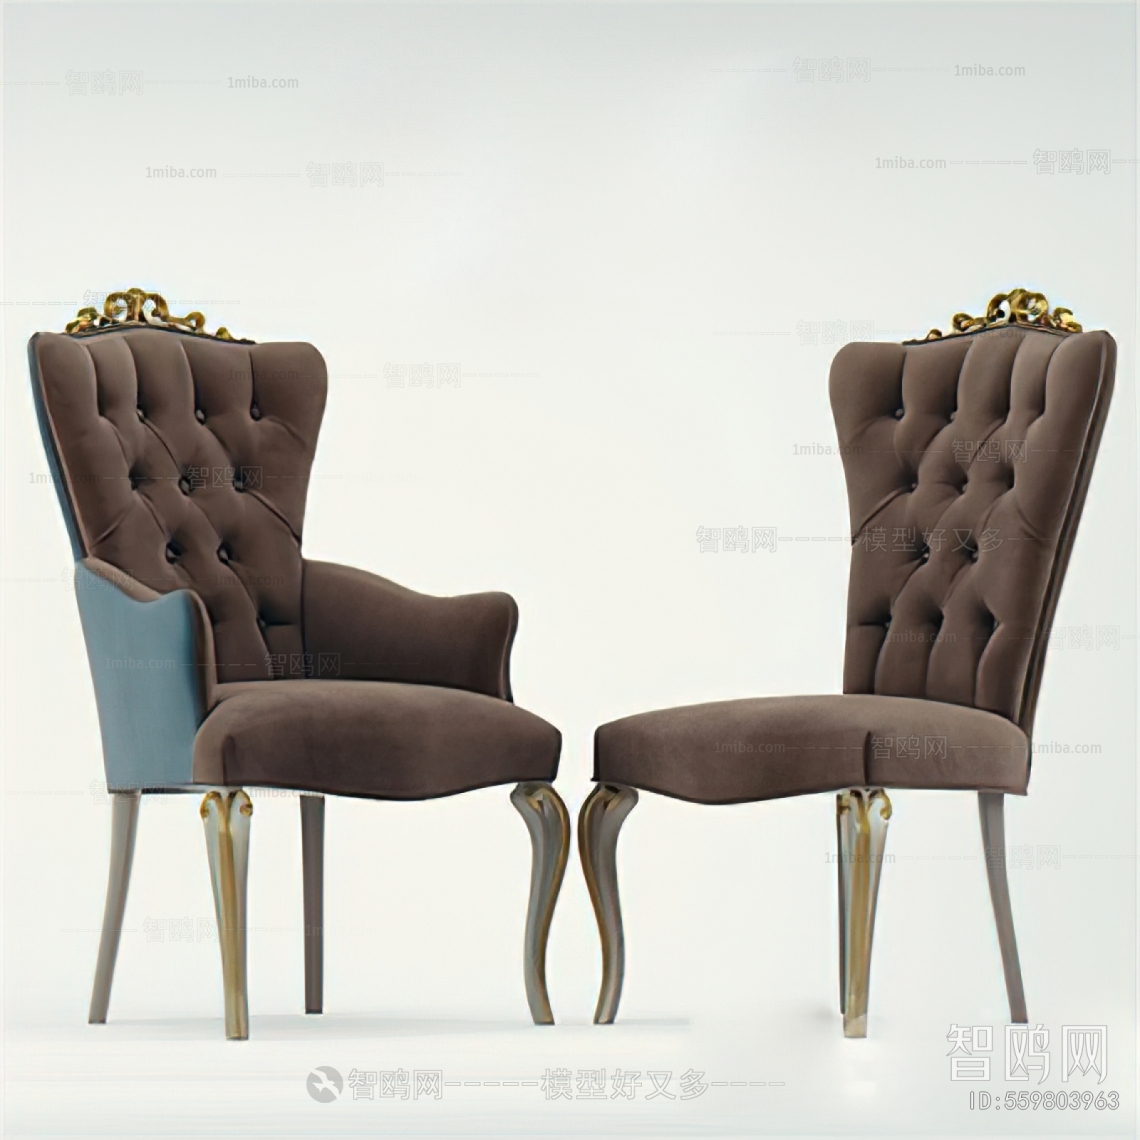 European Style Dining Chair